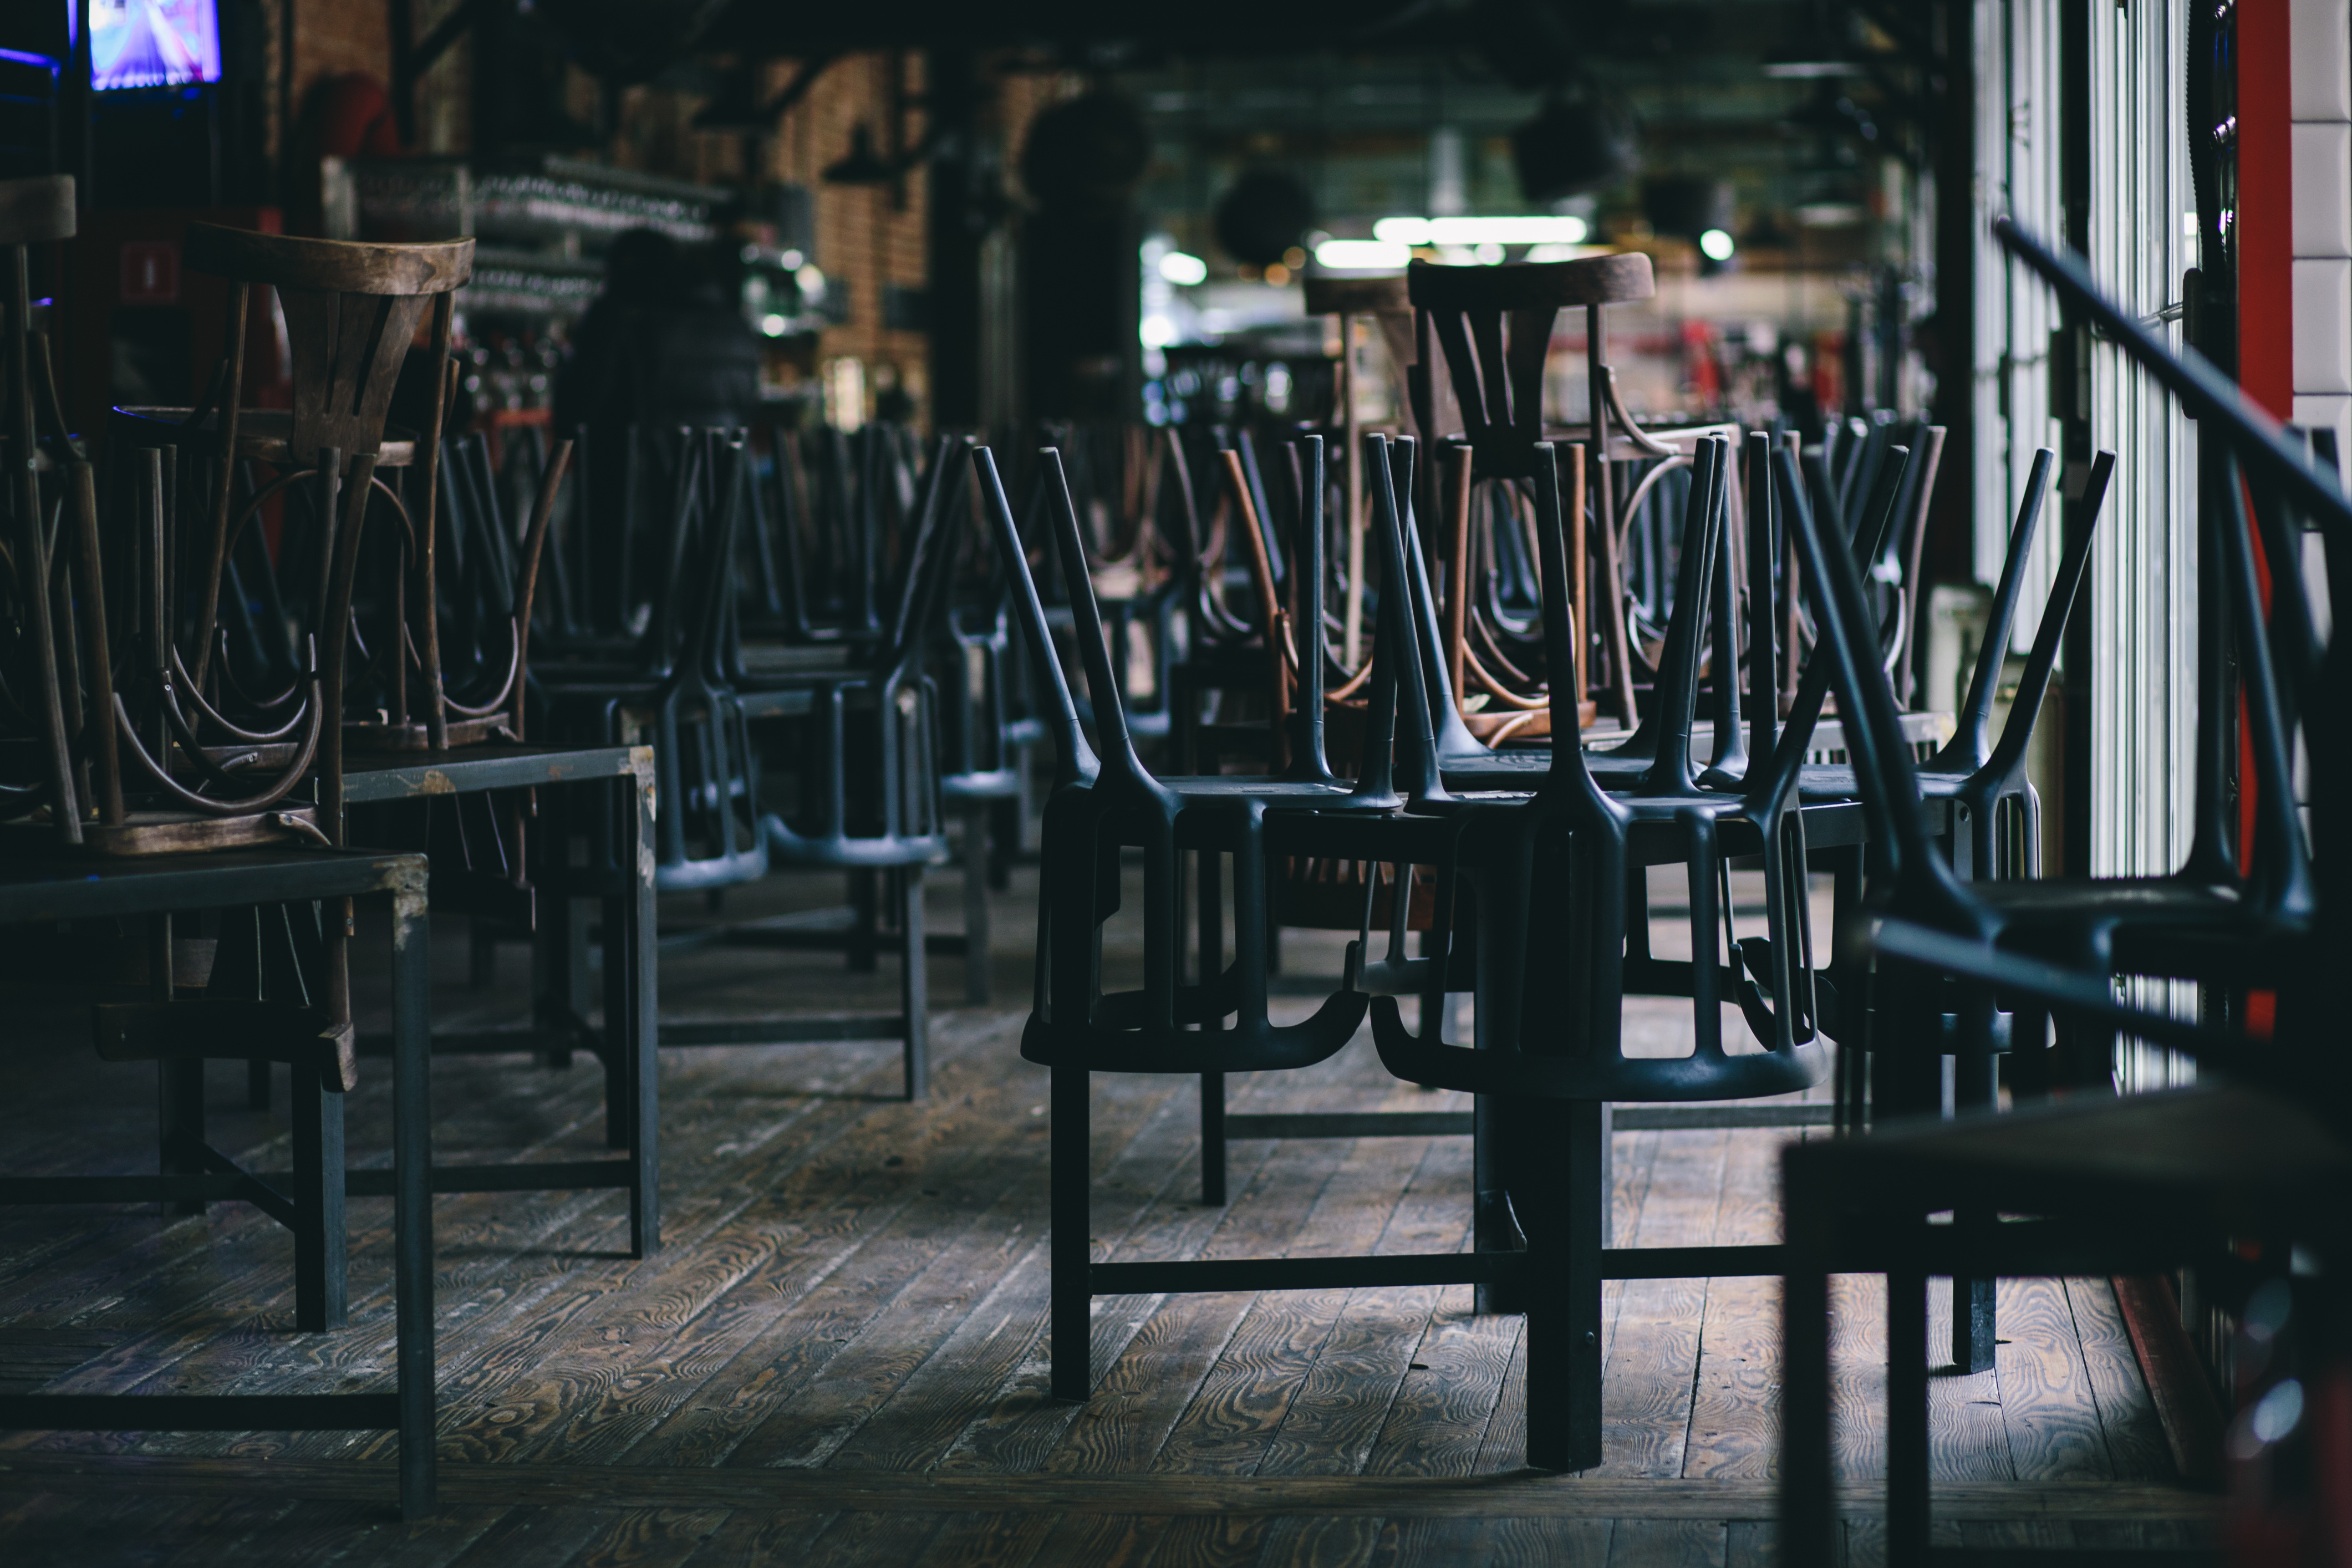 Chairs stacked on tables in a dark restaurant that is closed